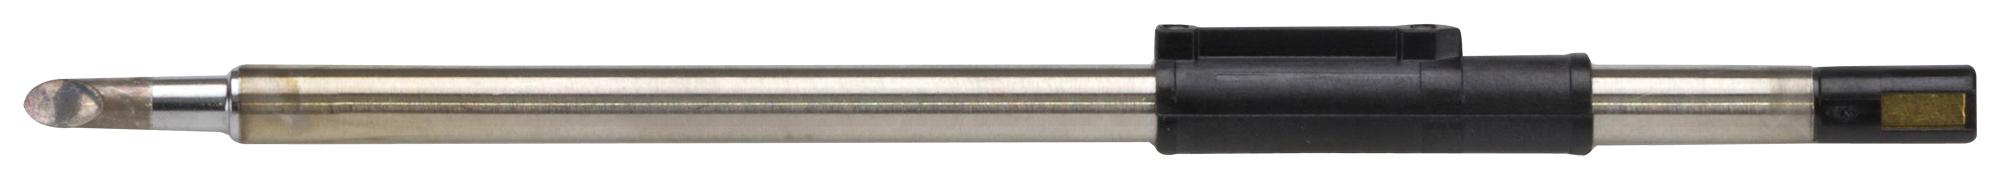 1124-0034-P1 TIP CARTRIDGE, CHISEL, SINGLE SIDED PACE